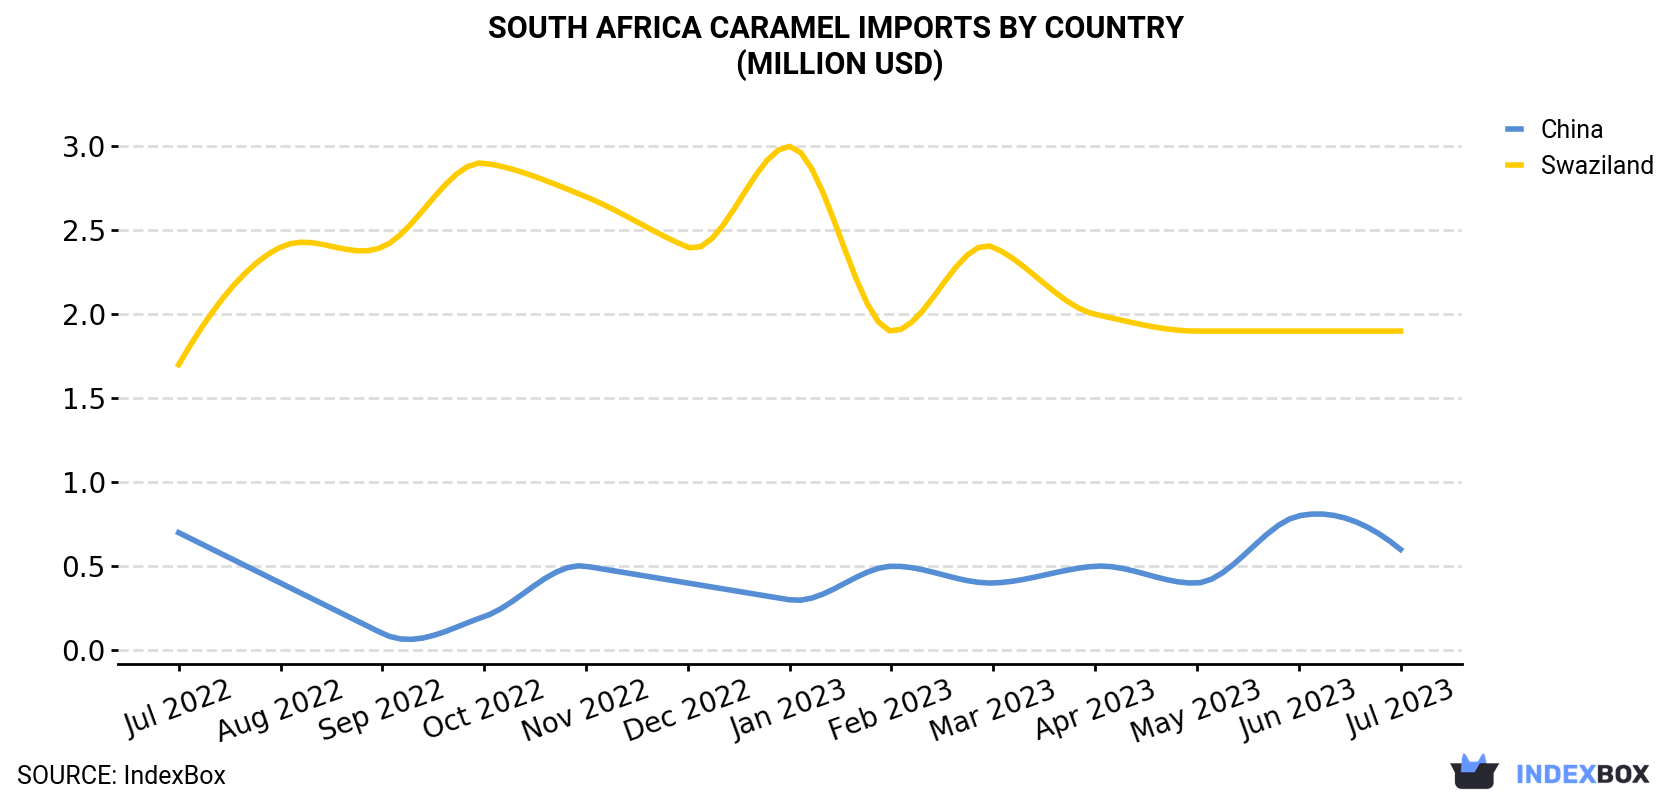 South Africa Caramel Imports By Country (Million USD)